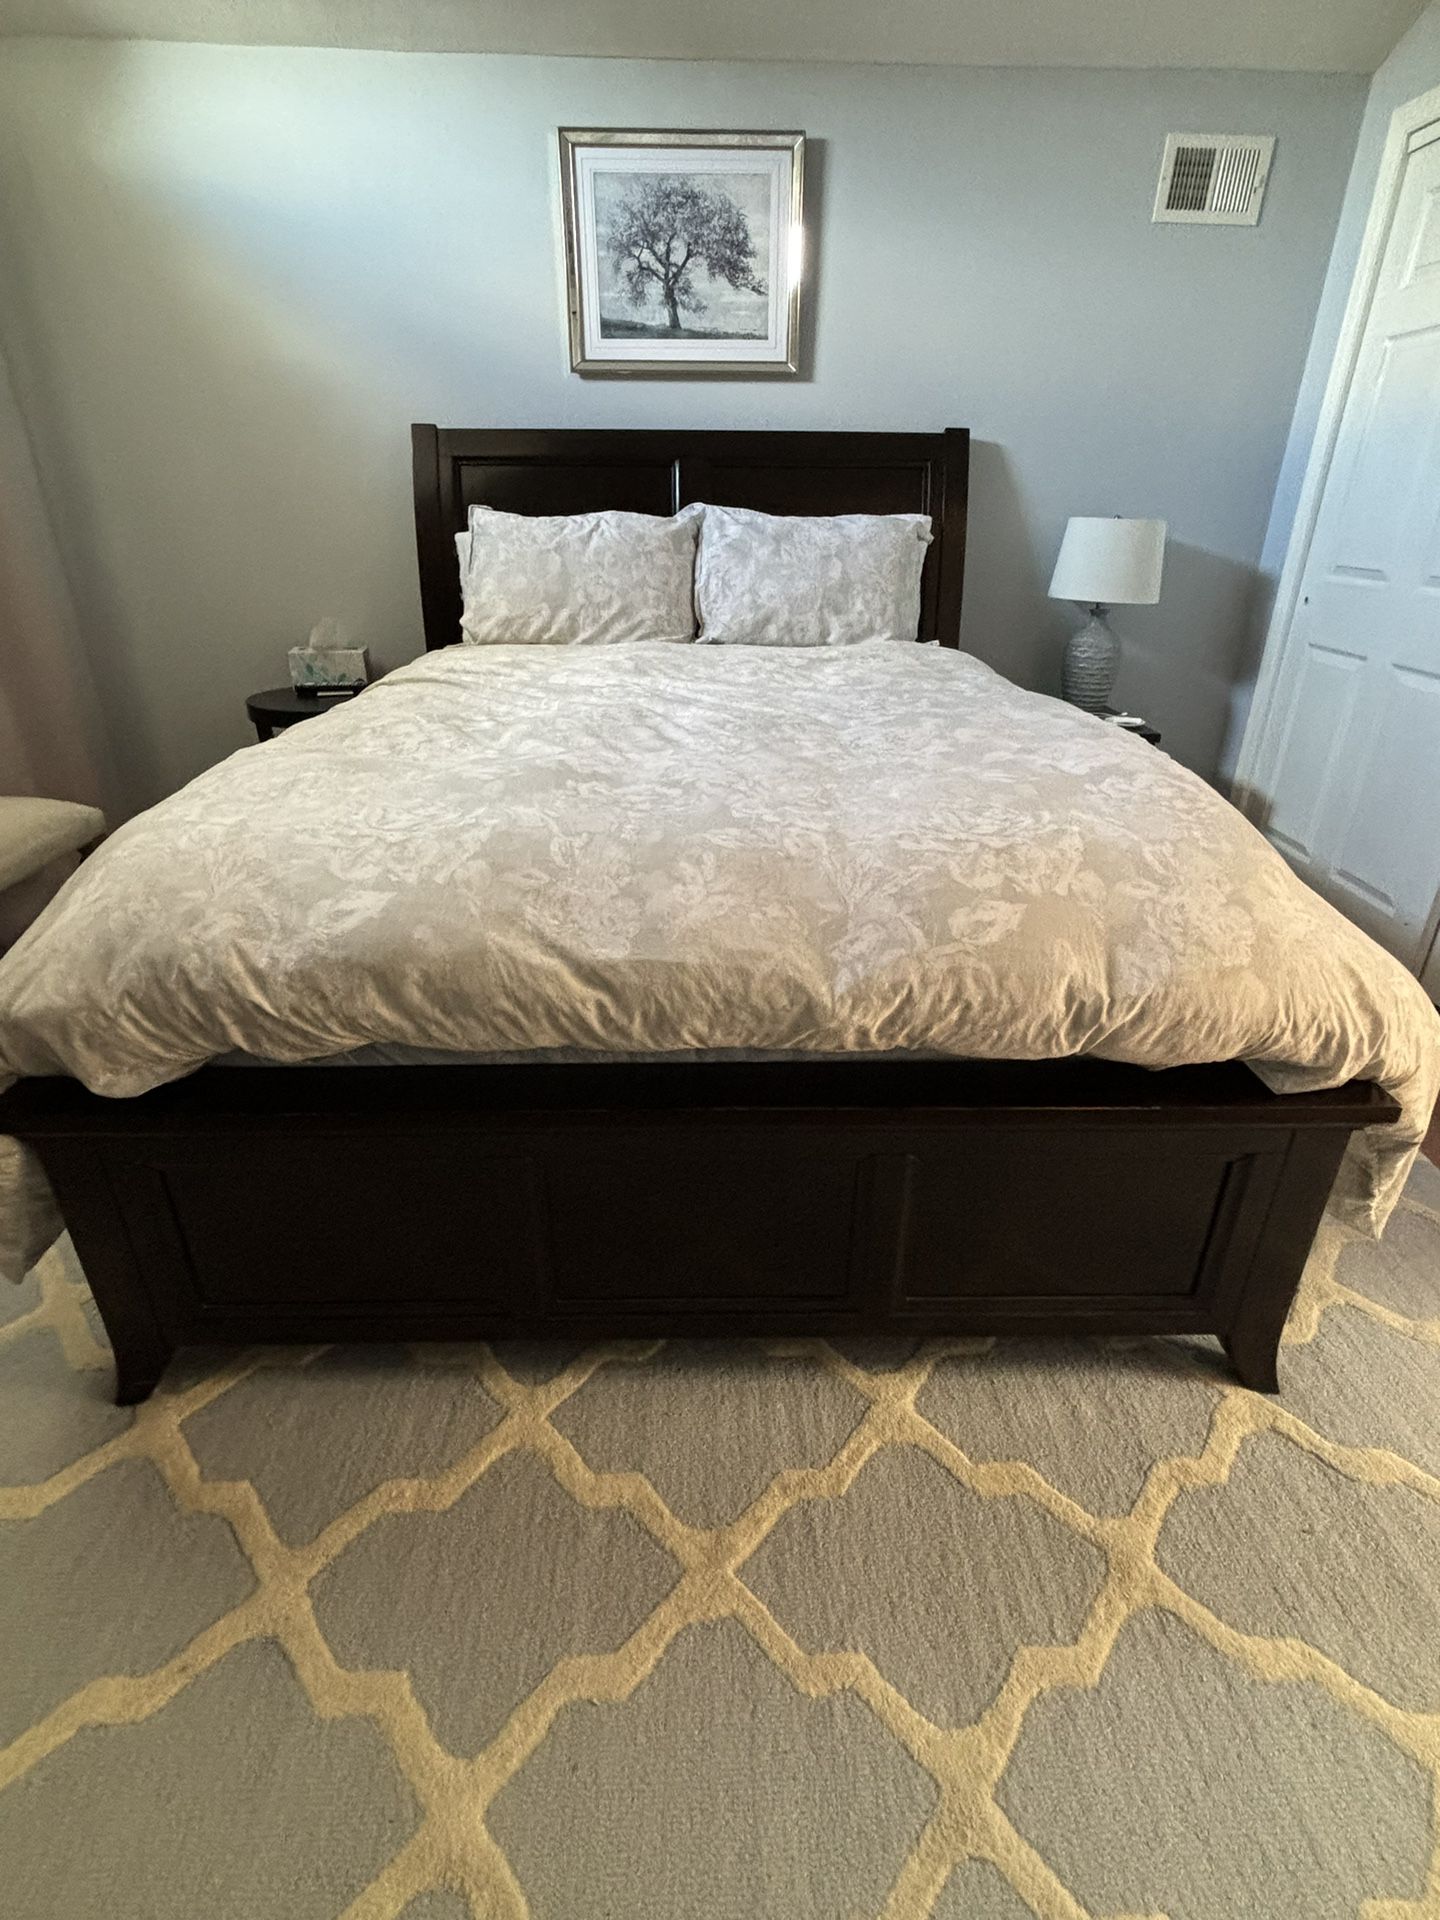 Queen Bed frame with Side Storage Drawers